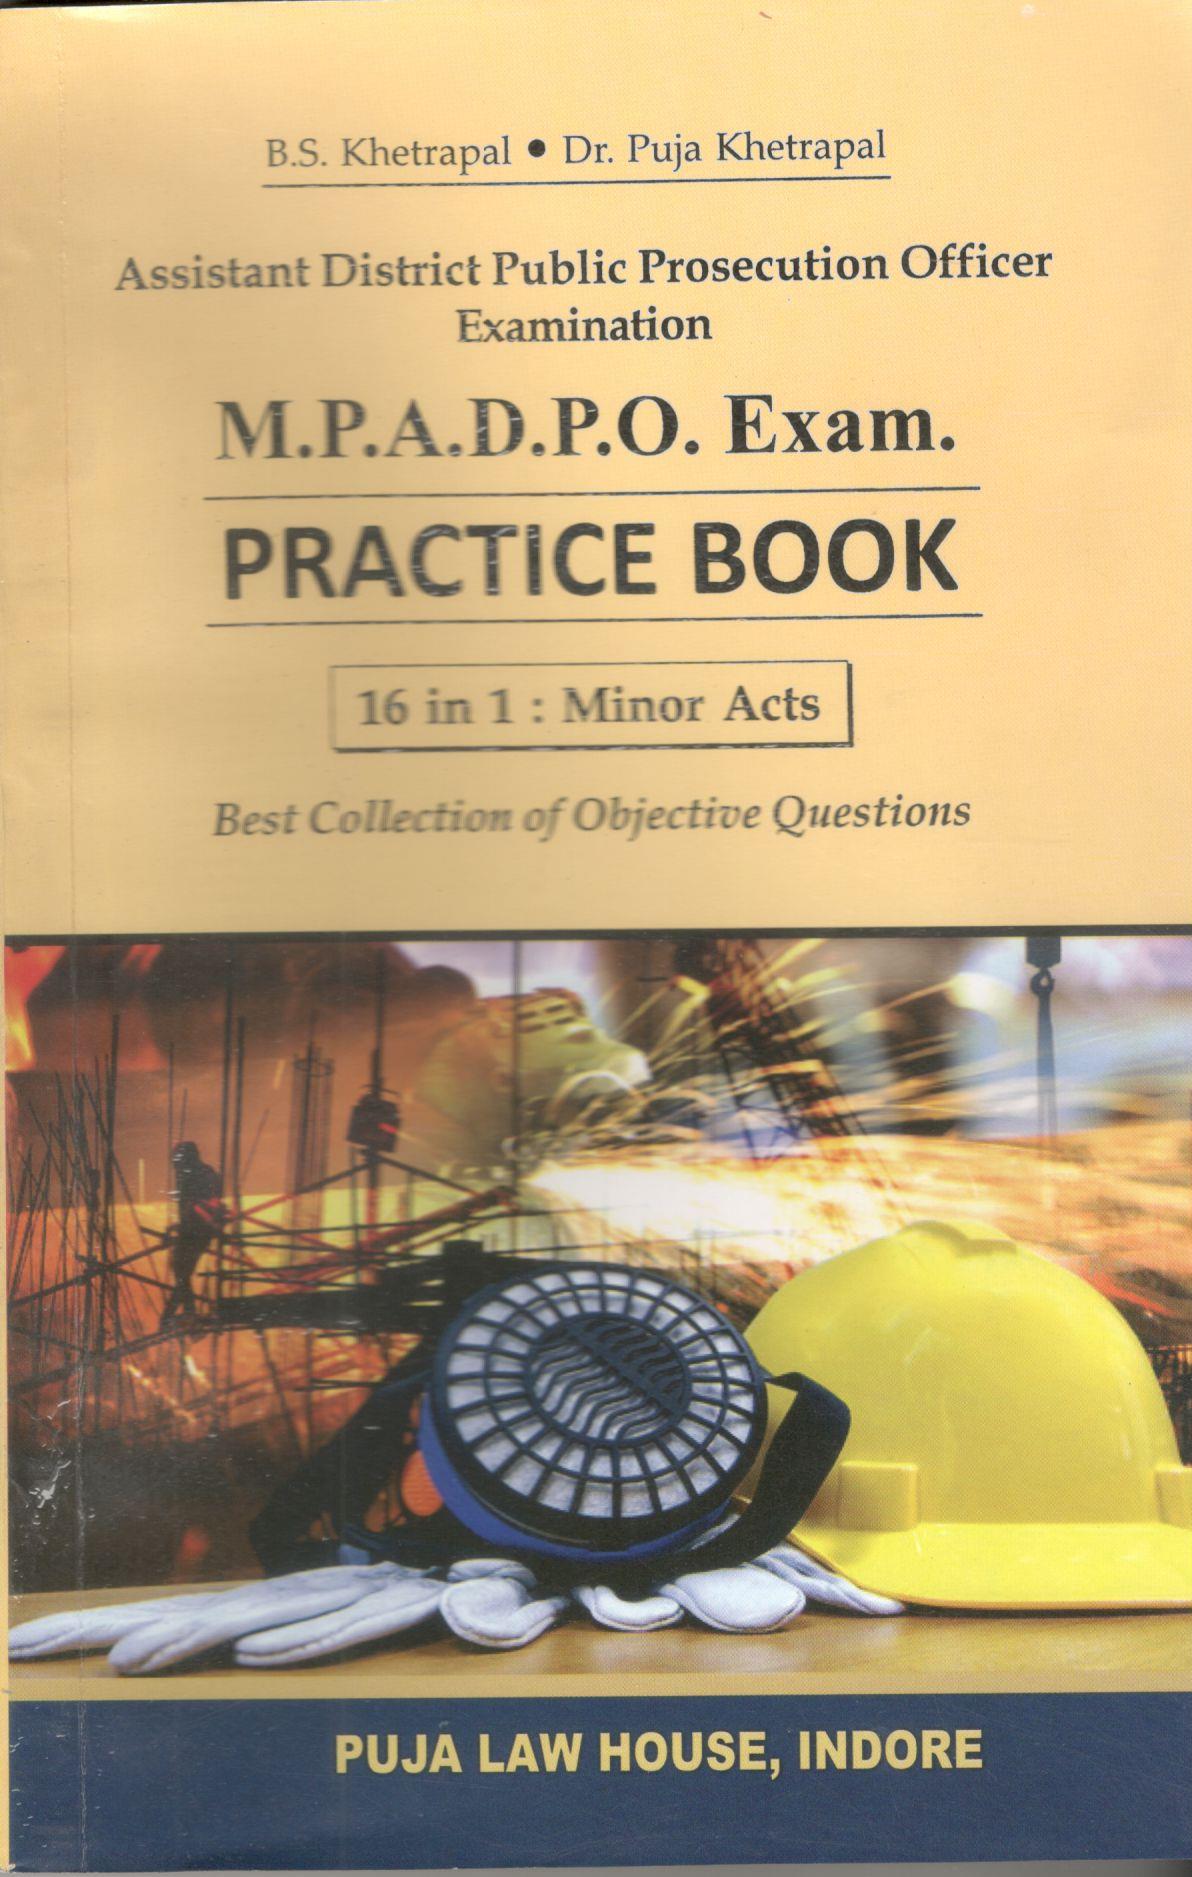 M.P.A.D.P.O. Exam. Practice Book [16 in 1: Minor Acts]